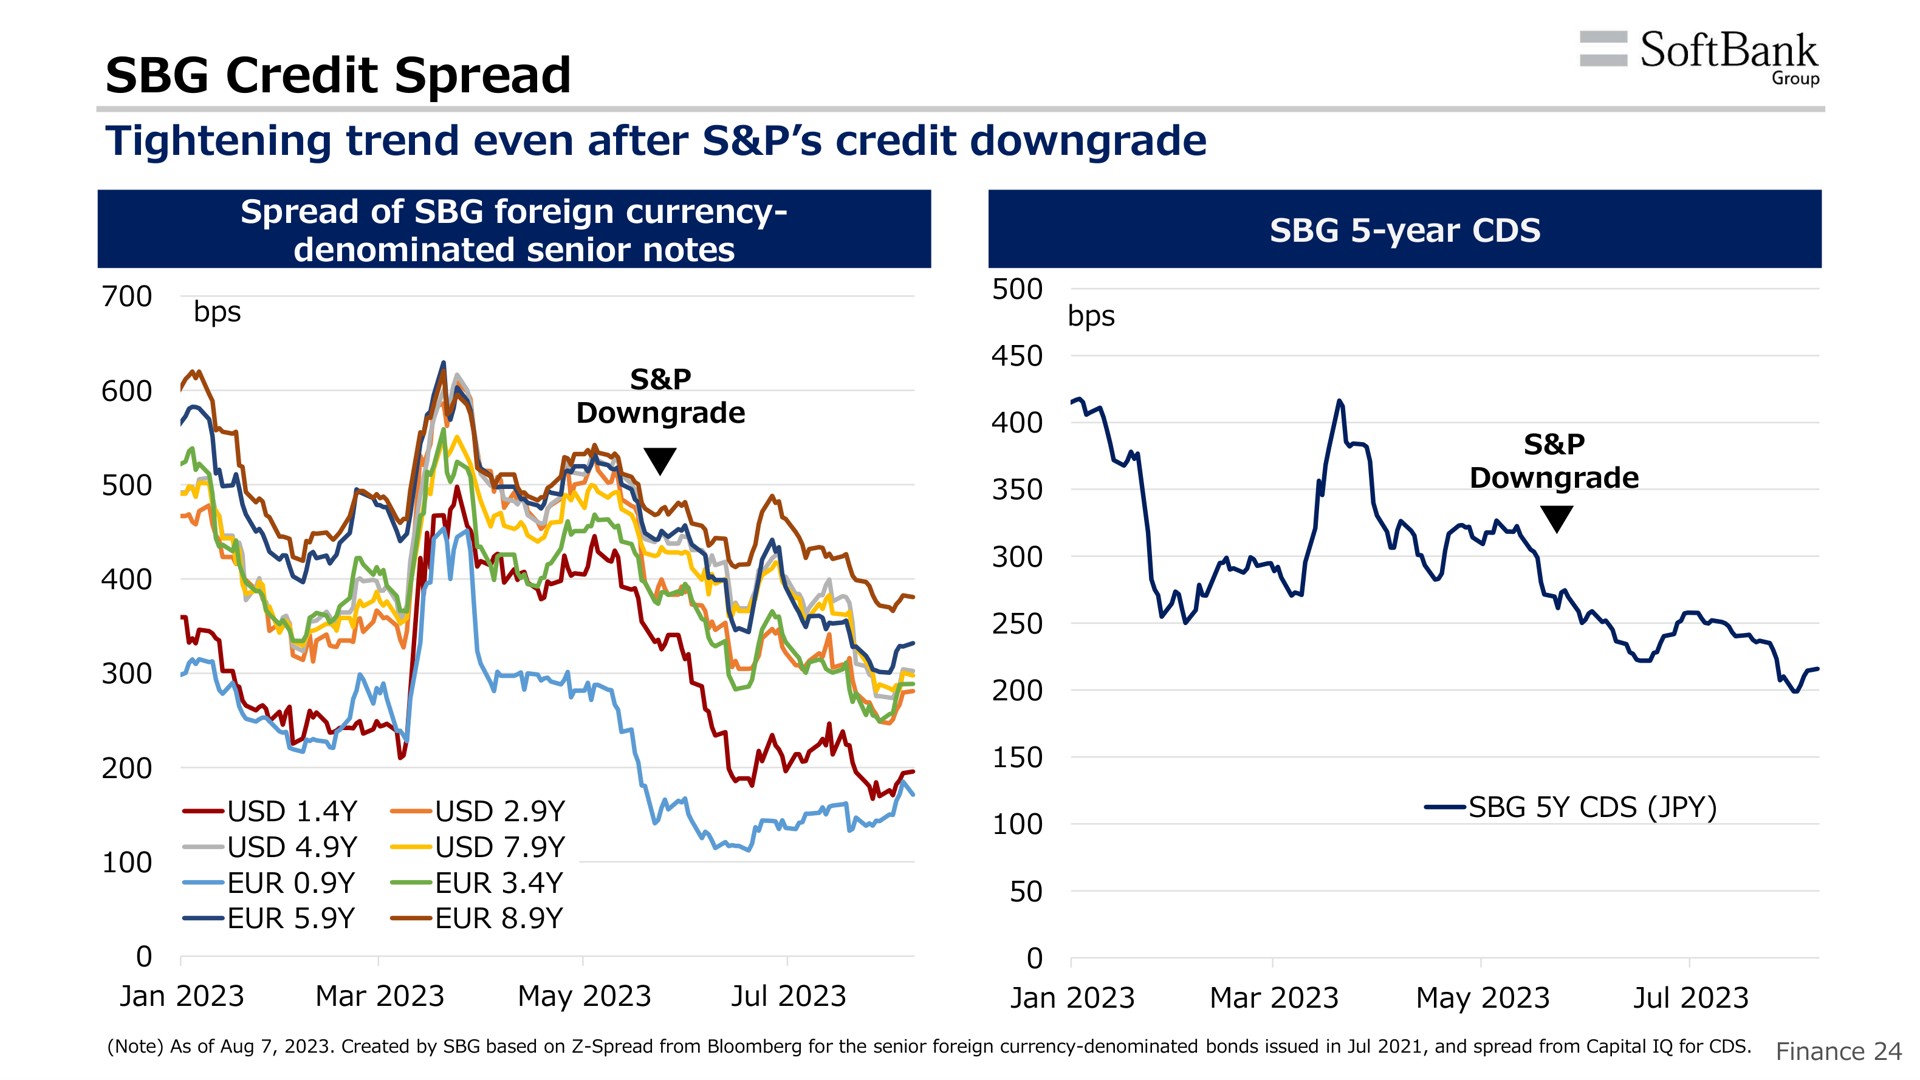 credit spread tightening trend even after credit downgrade | SoftBank